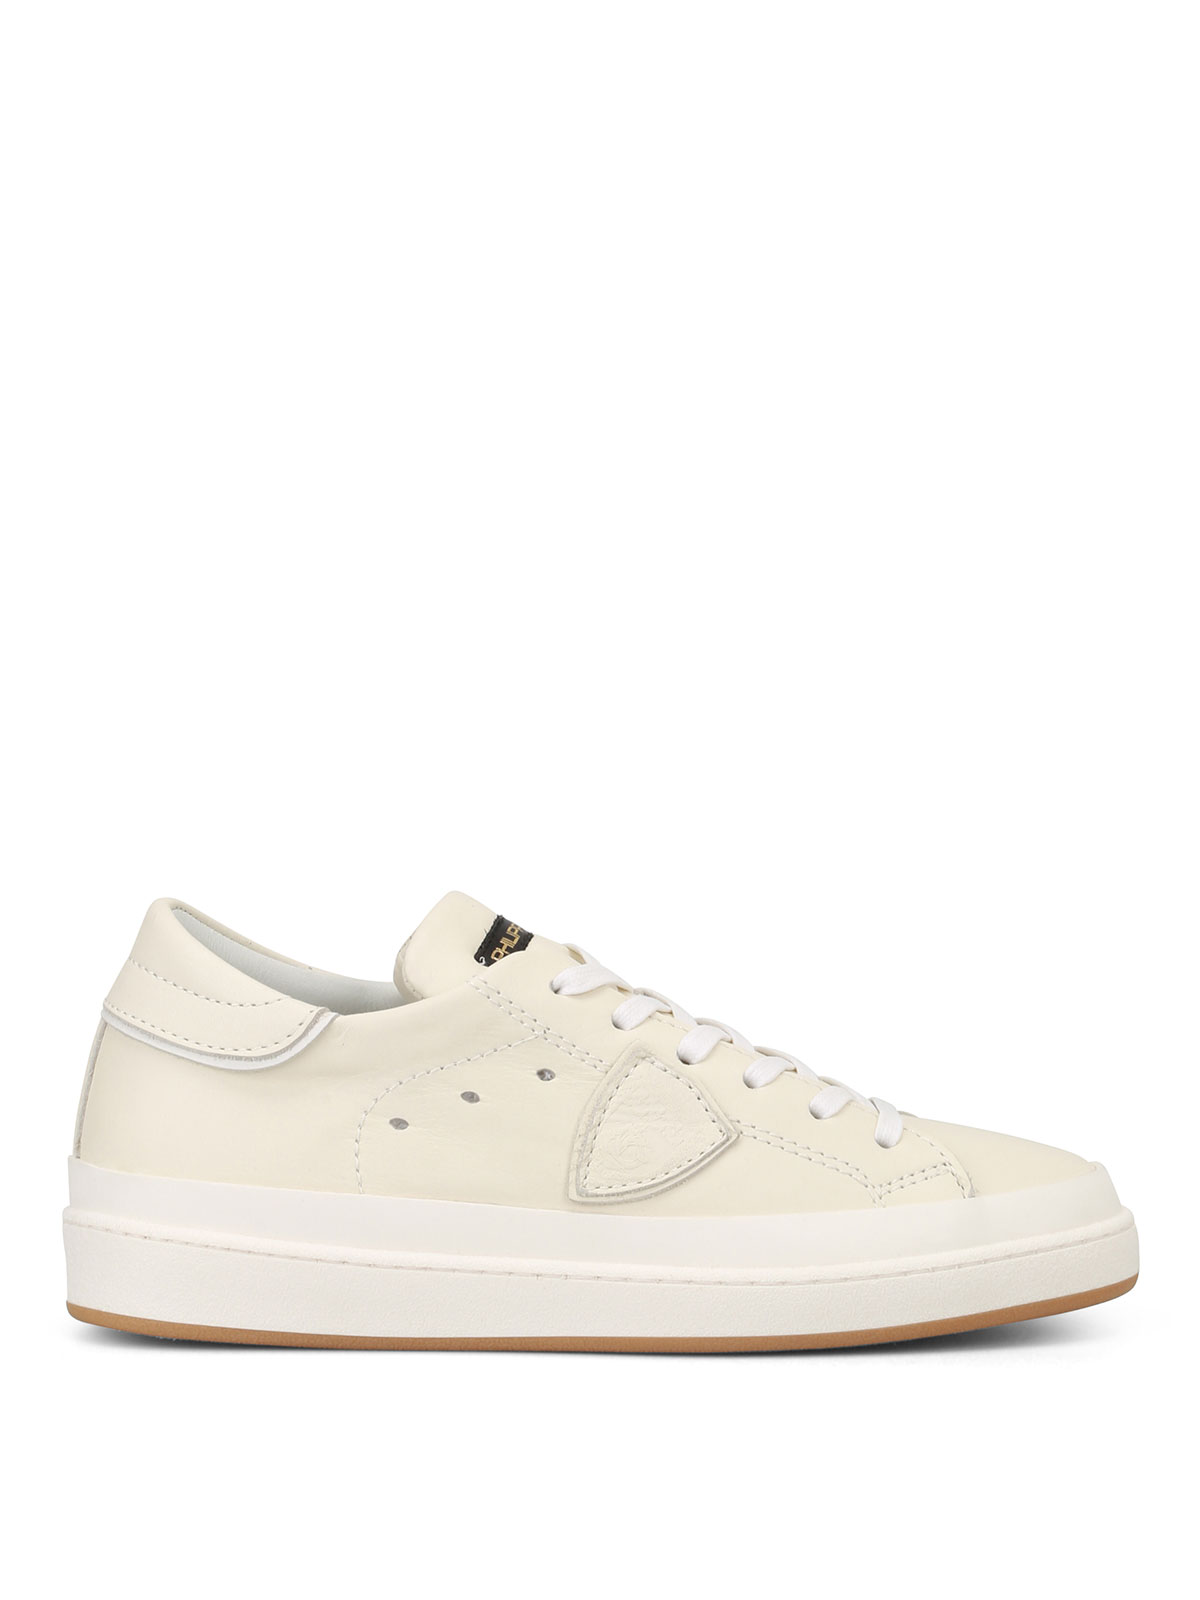 Trainers Philippe Model - Opera ivory leather sneakers - CKLUV005